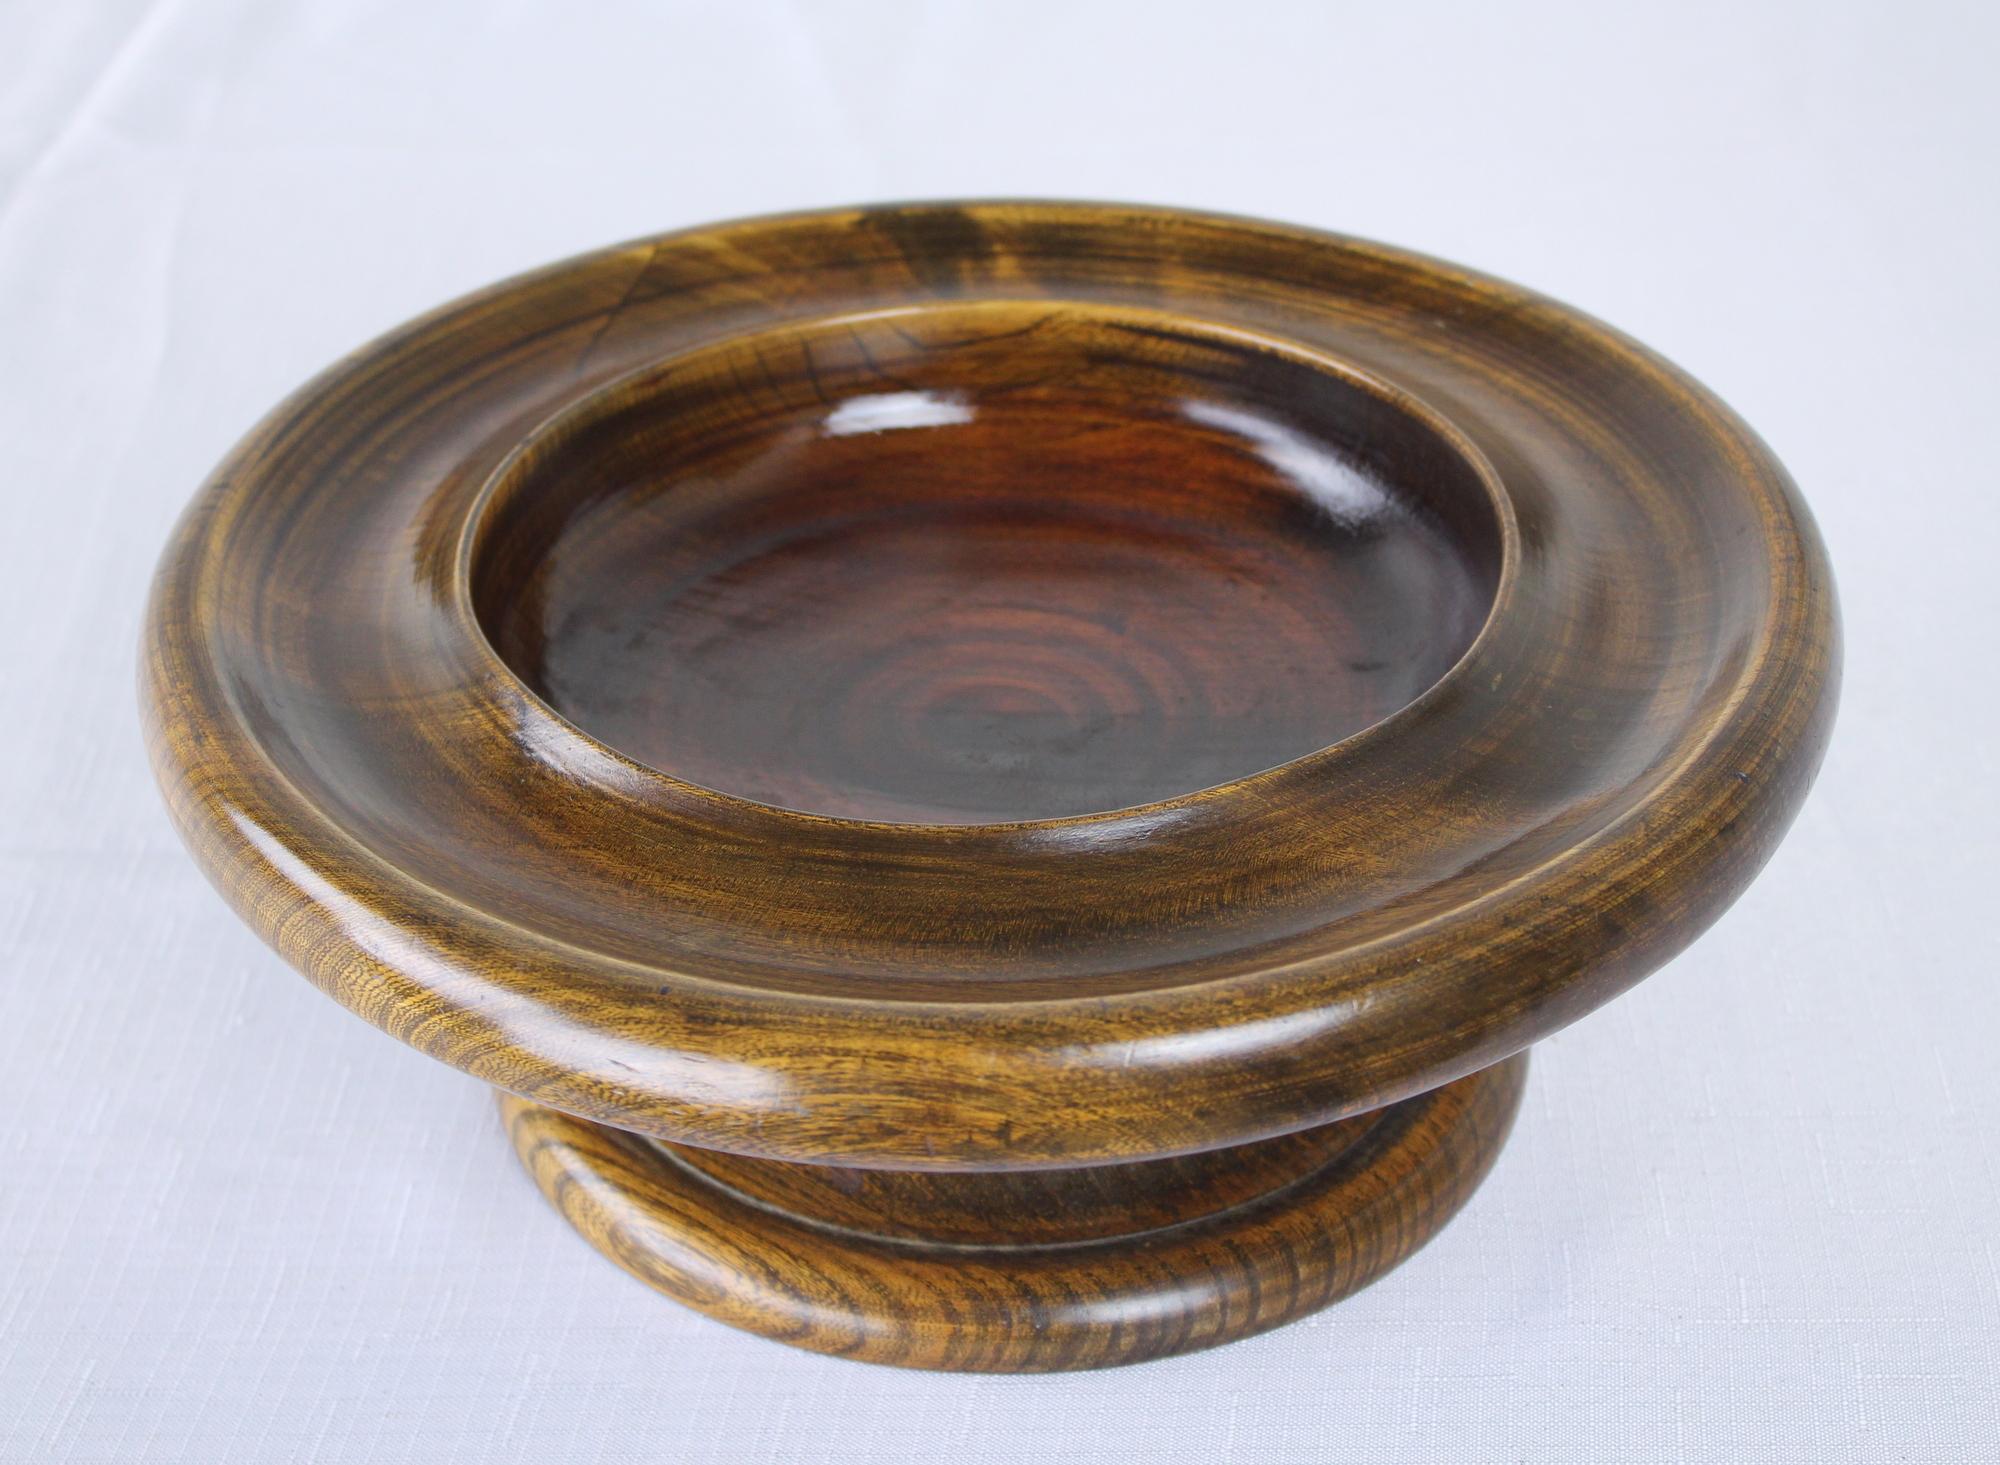 A simple and splendid elm serving bowl with pretty grain and nice color. Glowing and elegant. Felted on the bottom so it won't scratch surfaces.